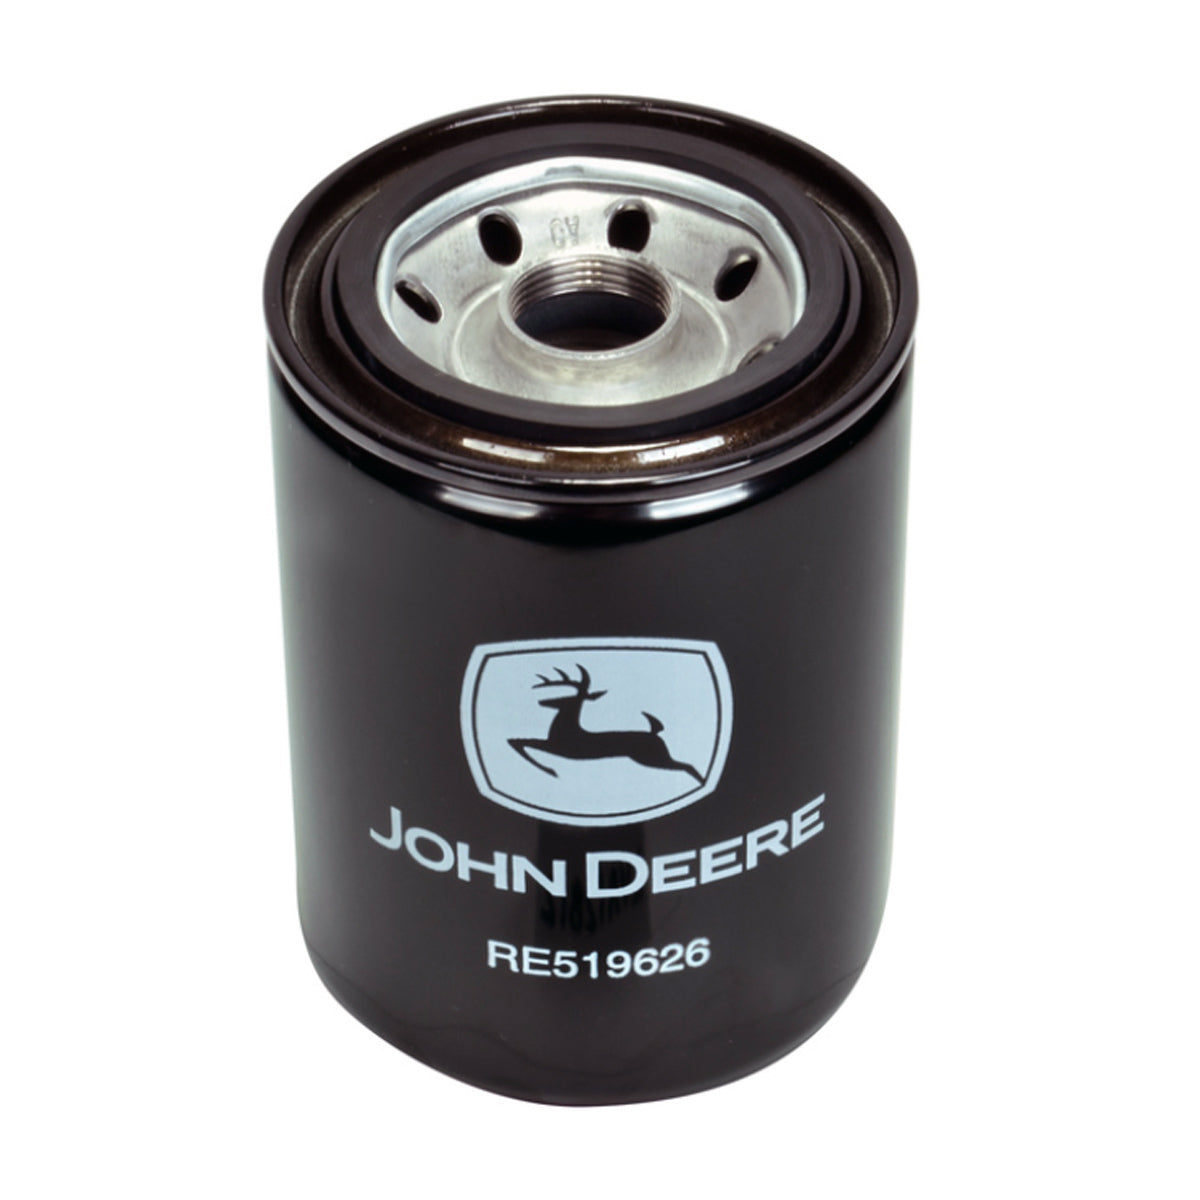 John Deere Oil Filter for 4020 Series Compact Utility Tractor - RE519626